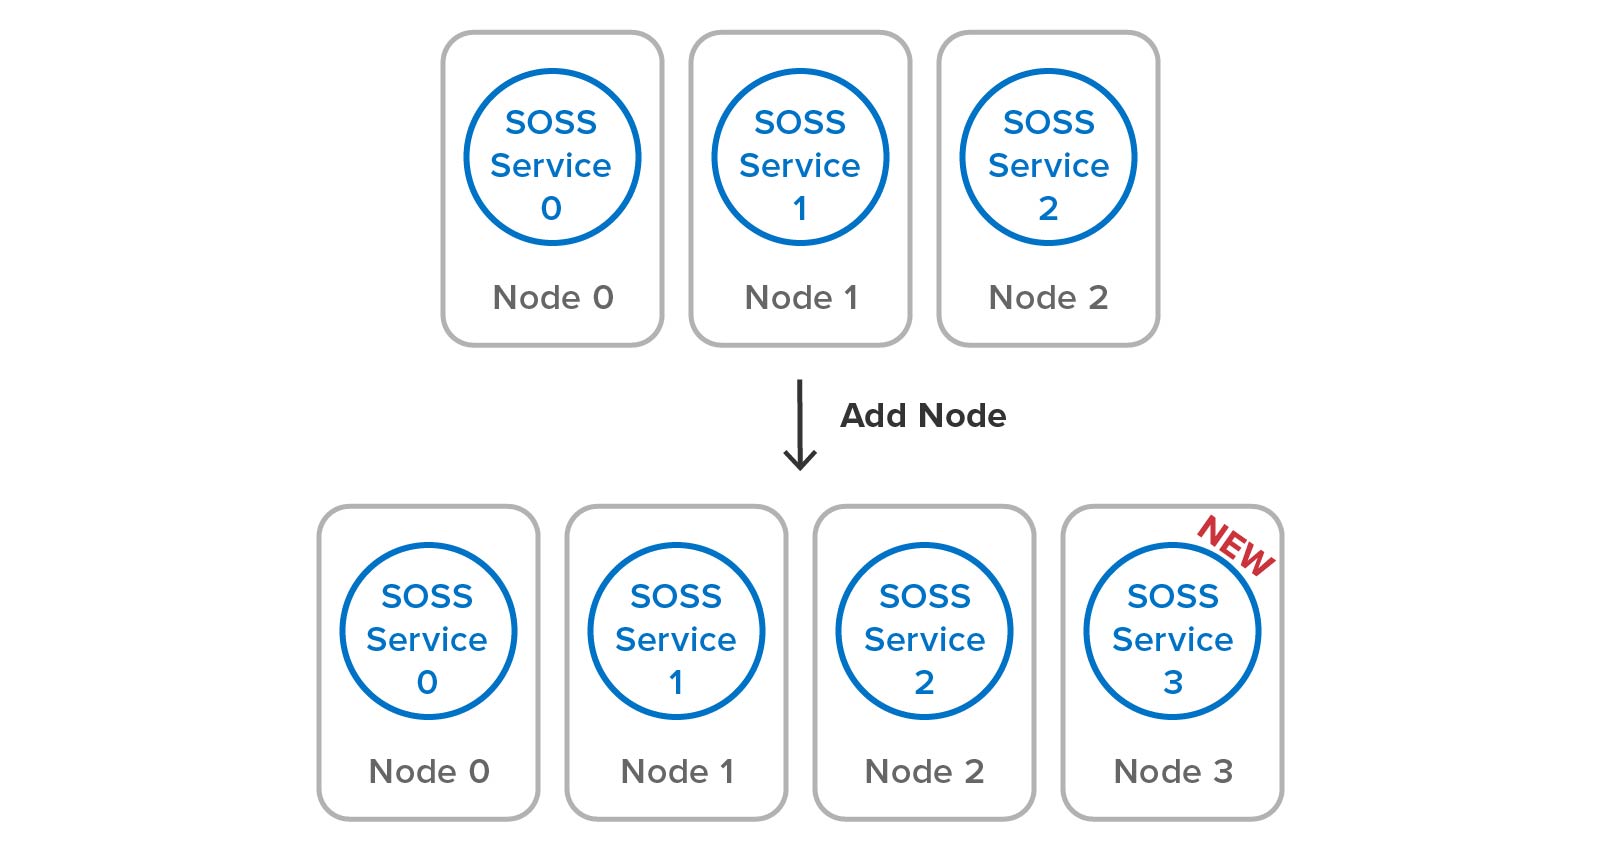 Adding a node to SOSS just requires adding a service process to the cluster.